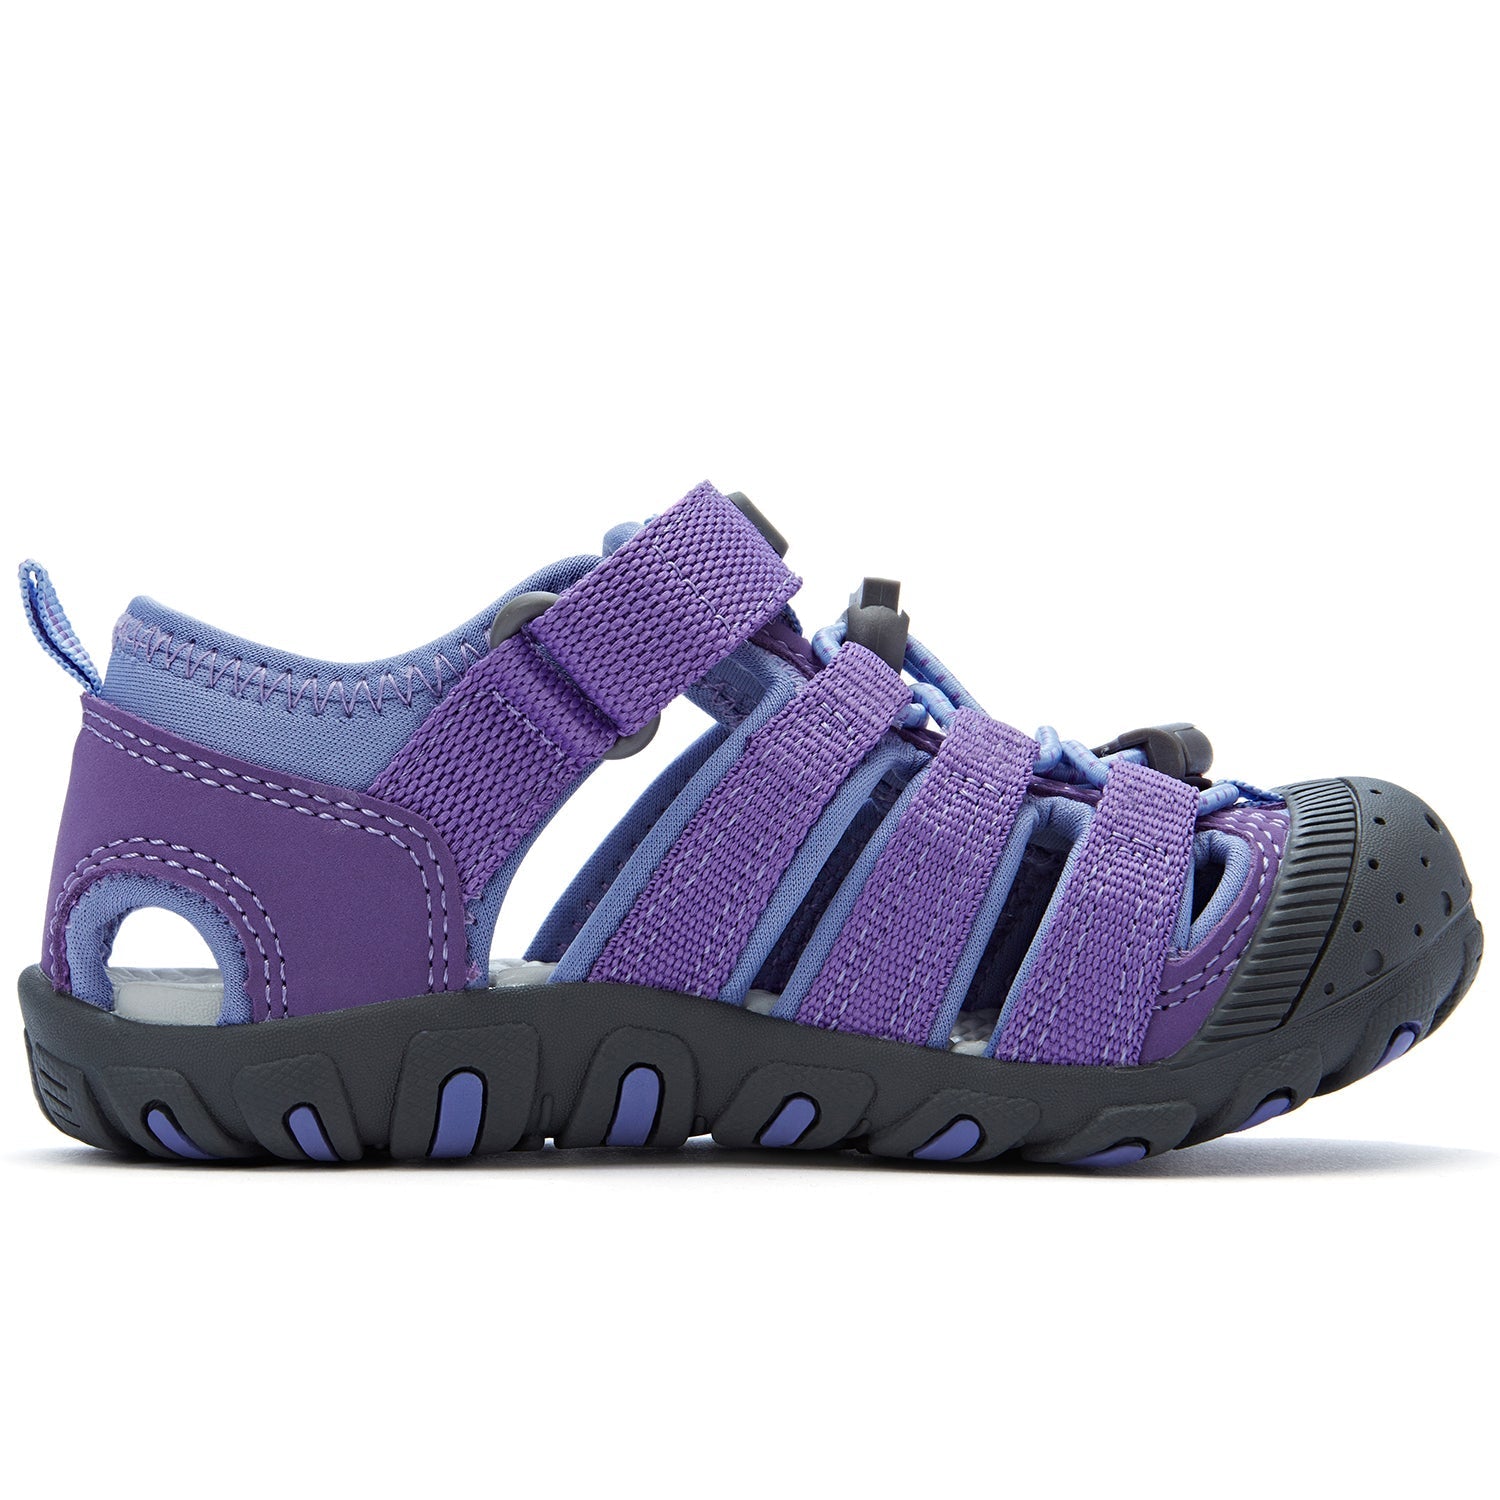 New Toddler Little Kid Sporty Closed Toe Water Sandal